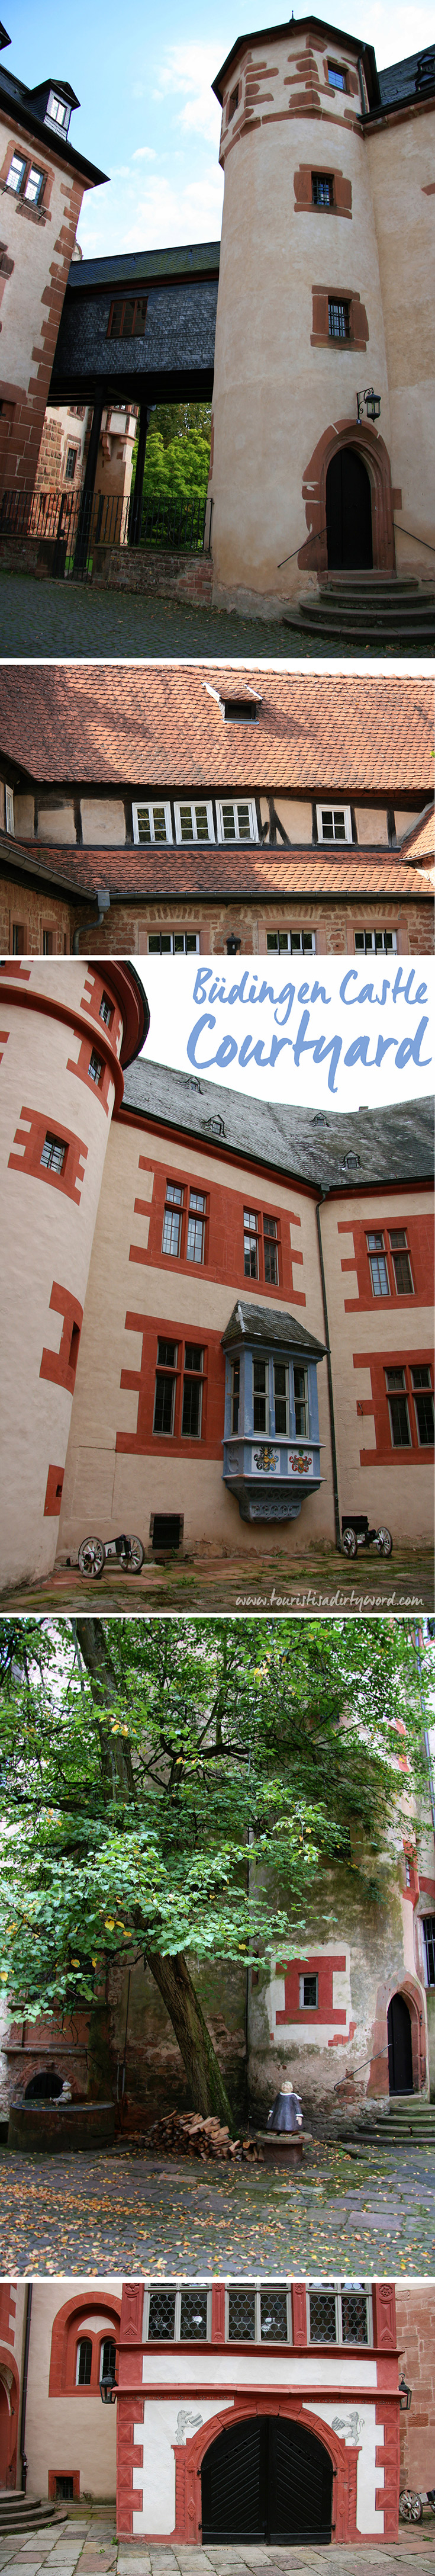 Different views of the charming, medieval Buedingen Castle Courtyard